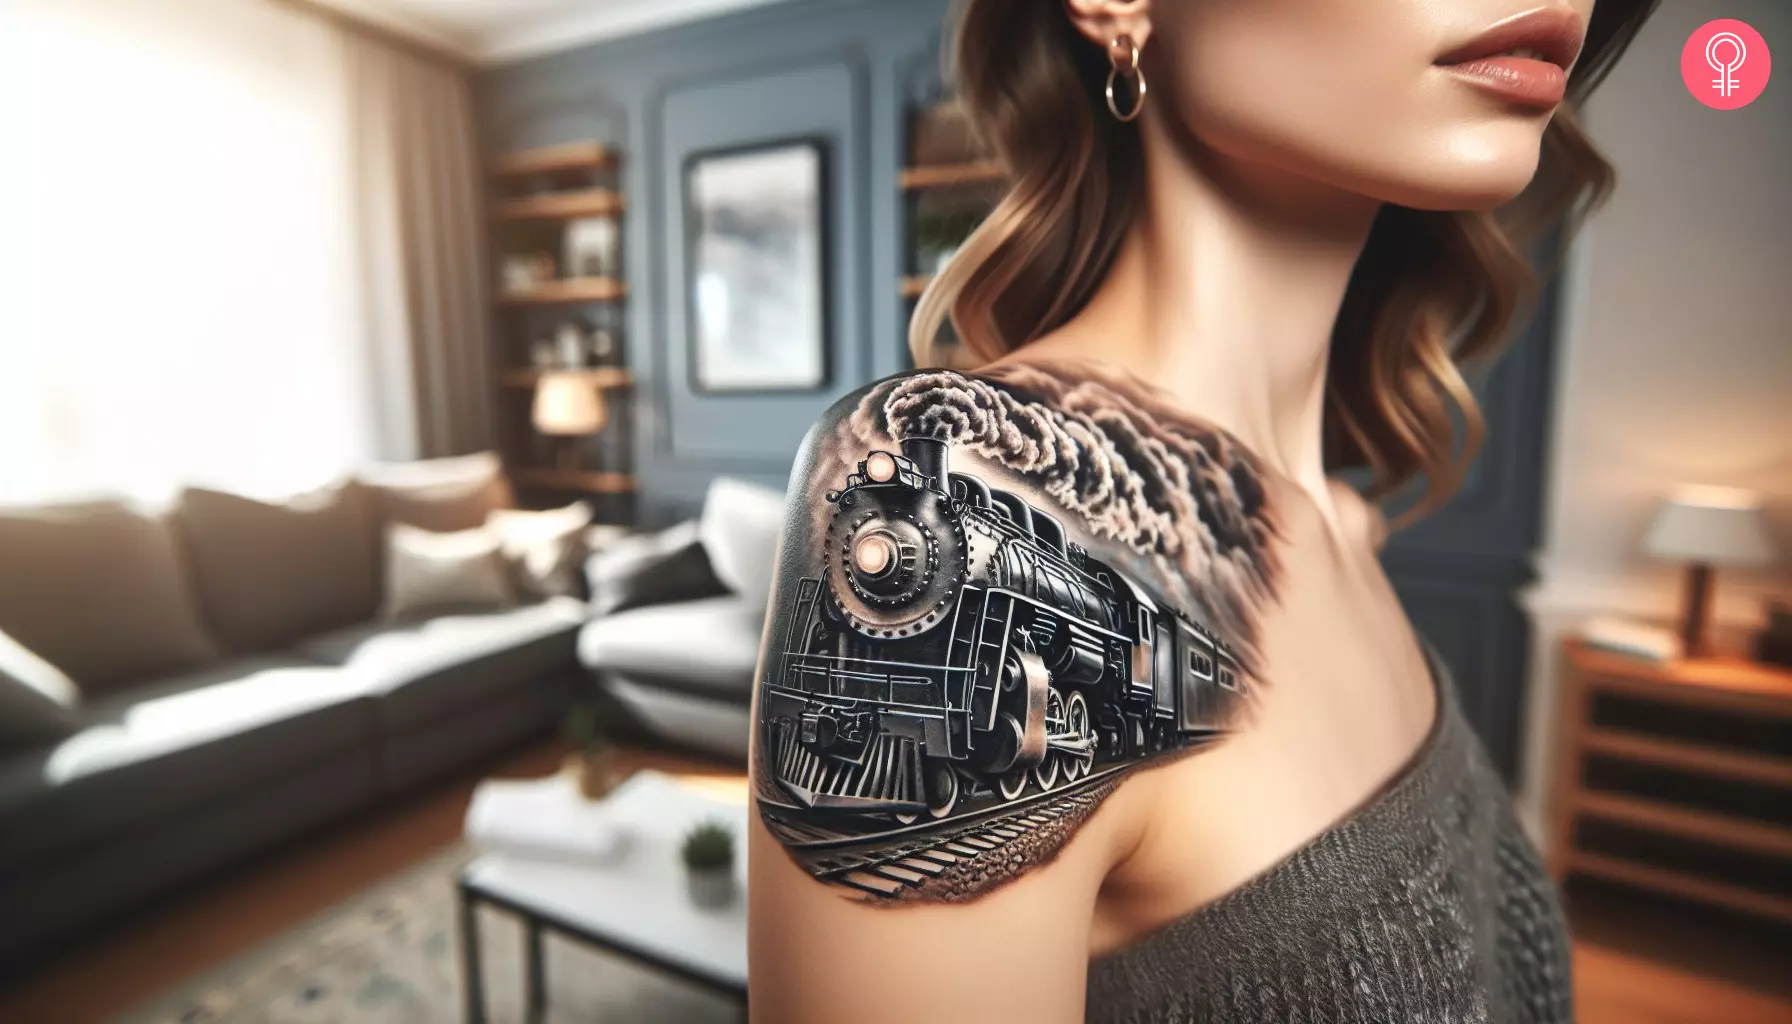 A realistic train tattoo on the shoulder of a woman